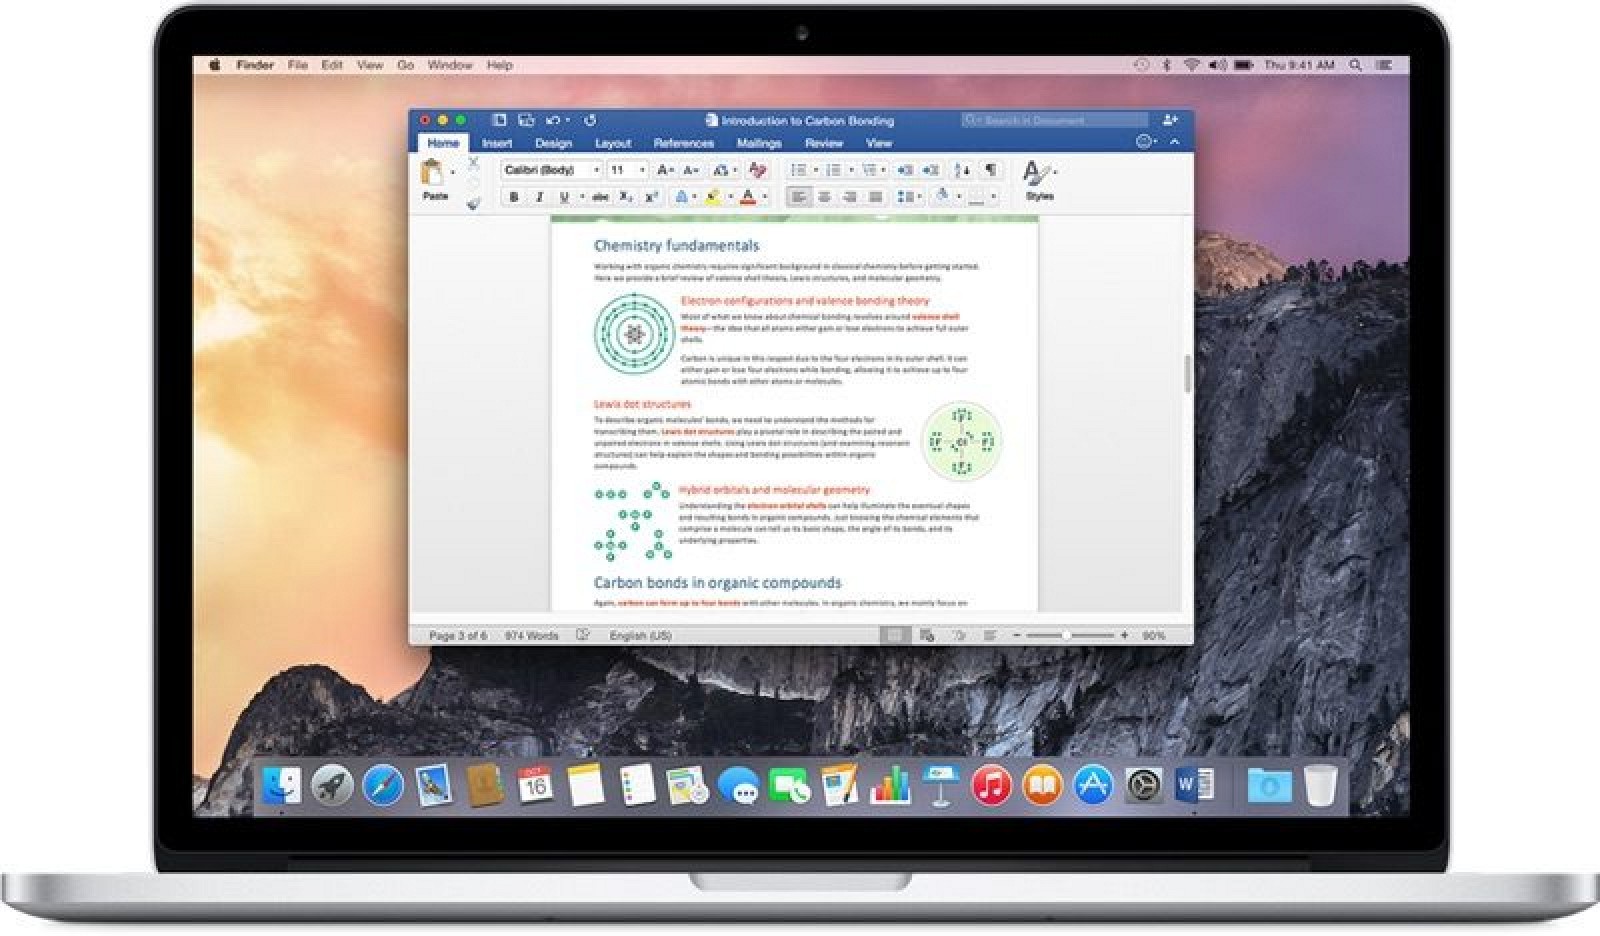 Microsoft Security Update Brings 64-Bit Support to All Mac Office Apps